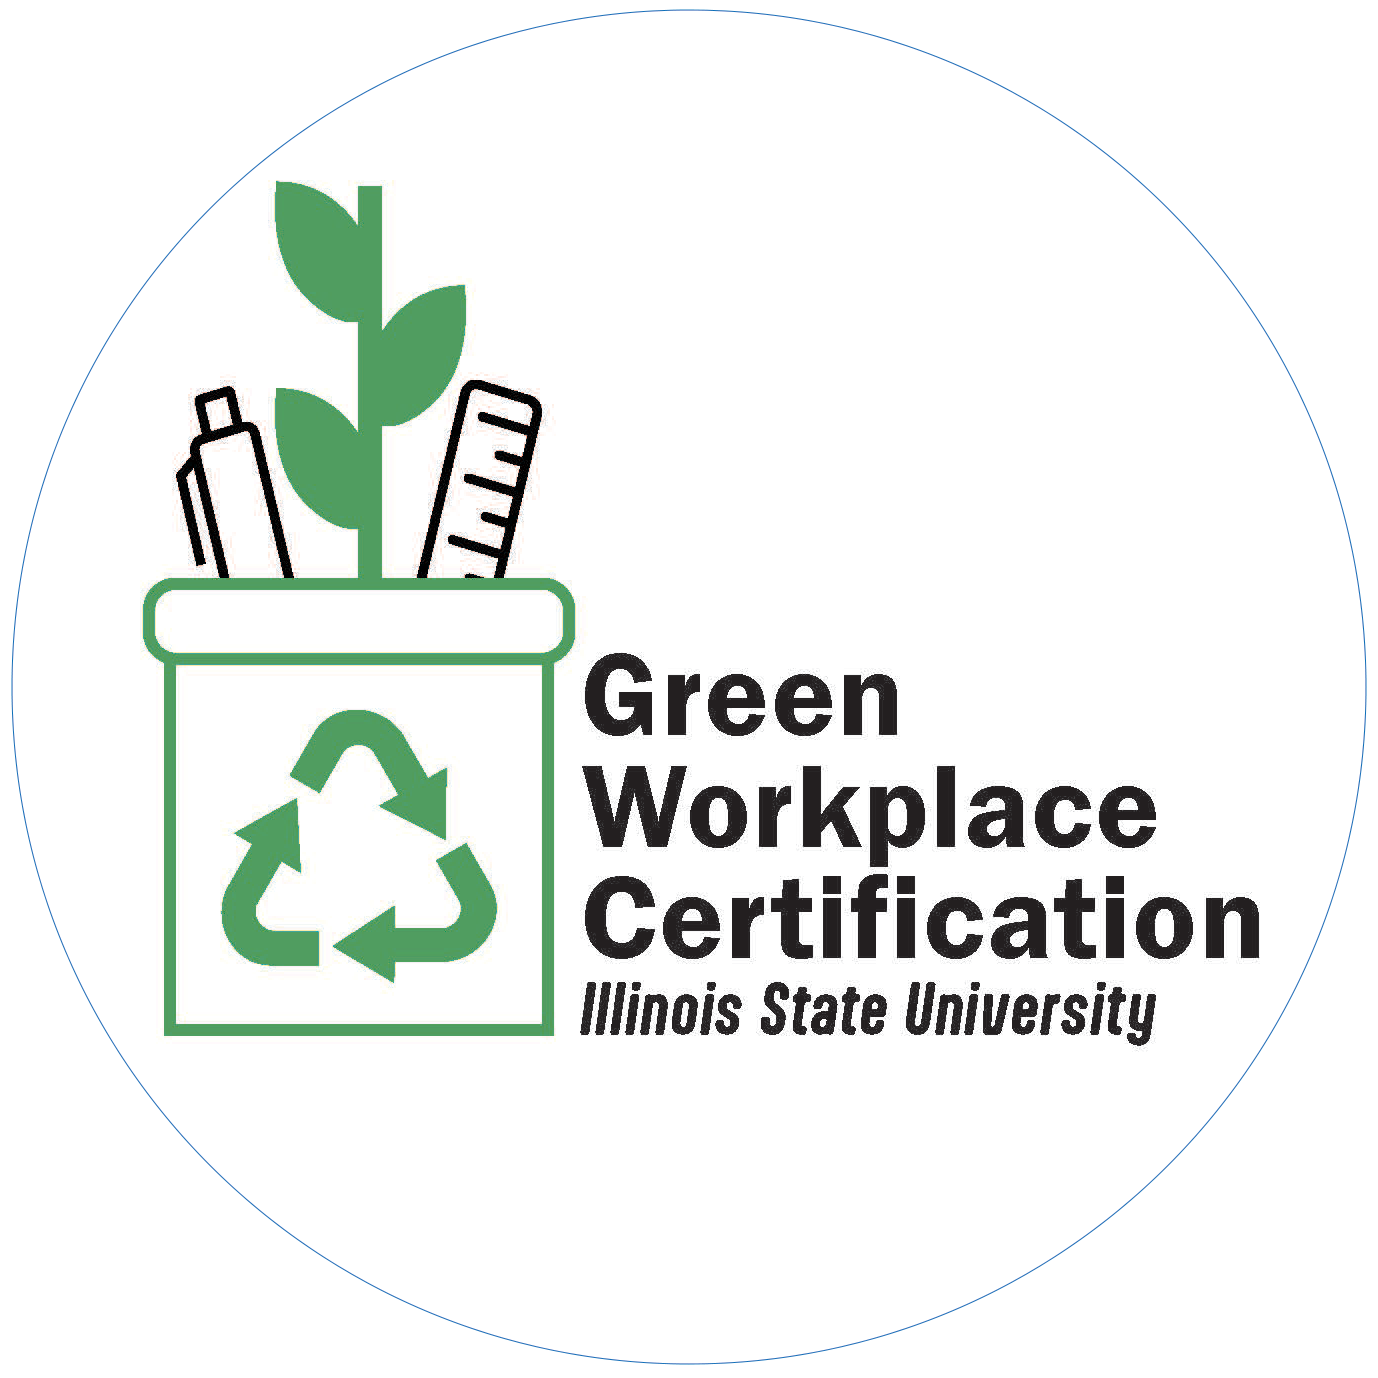 logo for the Green Workplace Certification at Illinois State University. A cup with a recycle symbol contains a pen and ruler and a stem with several leaves